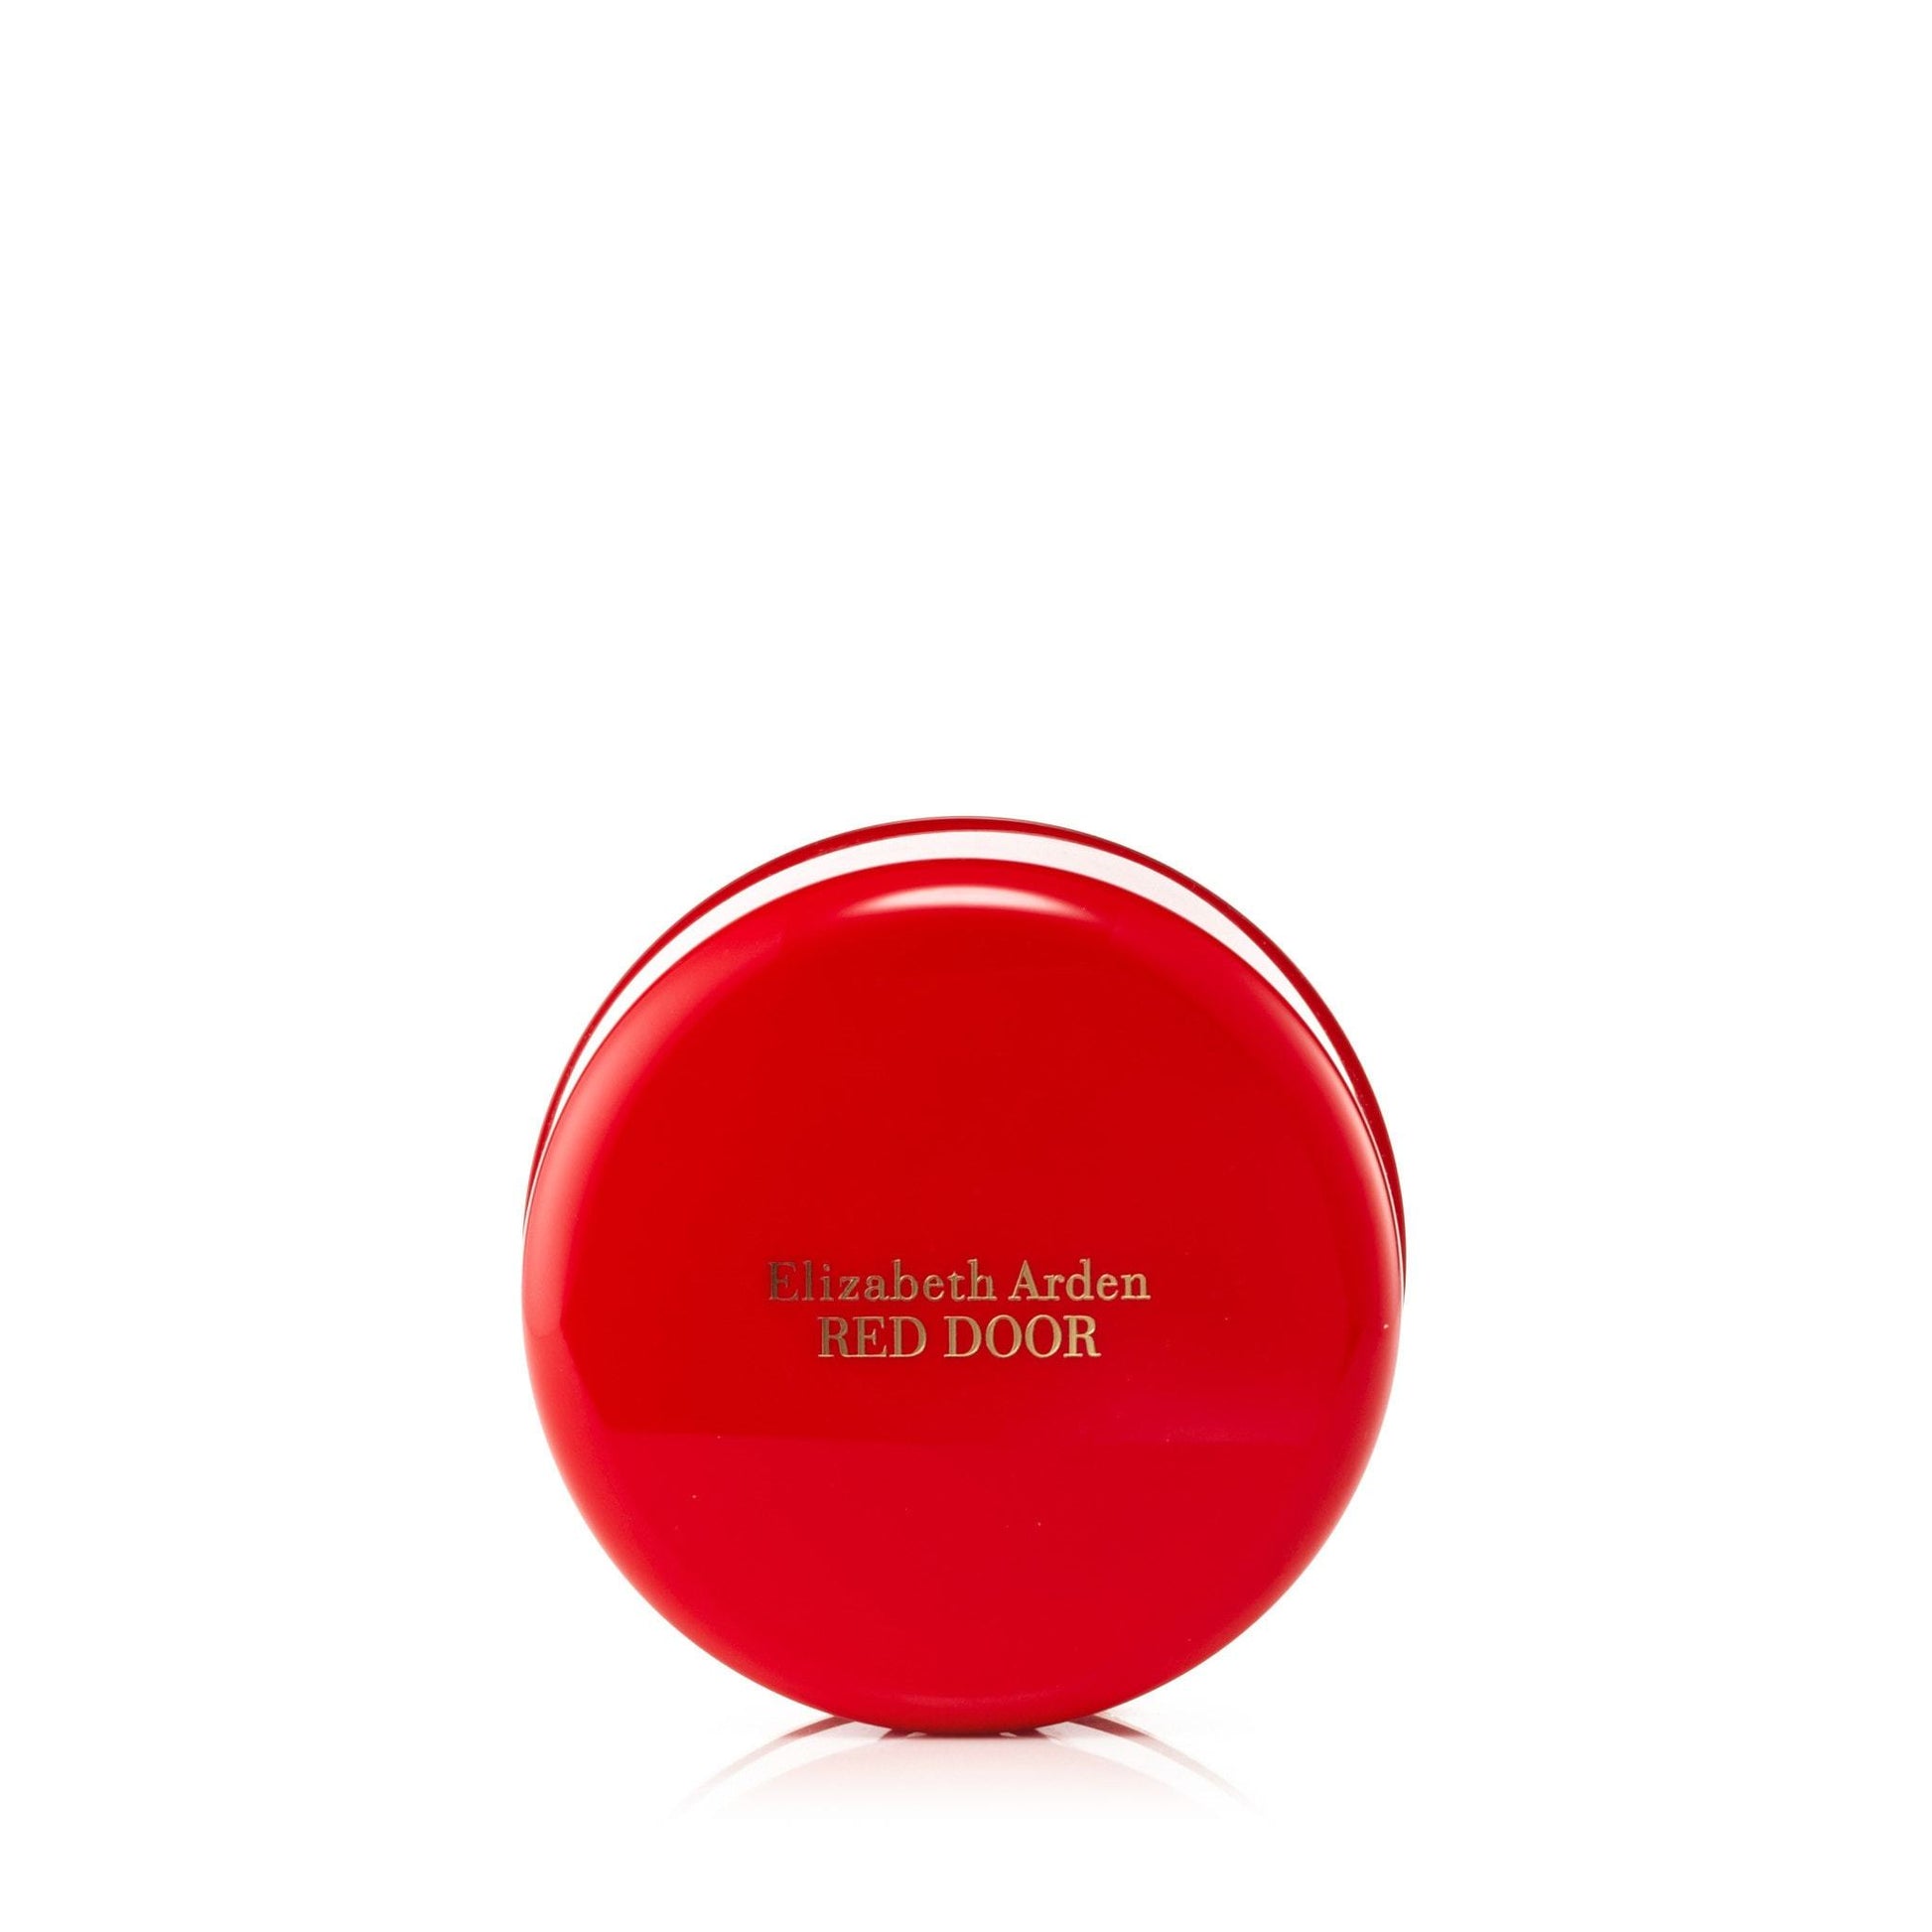 Red Door Dusting Powder for Women by Elizabeth Arden, Product image 2